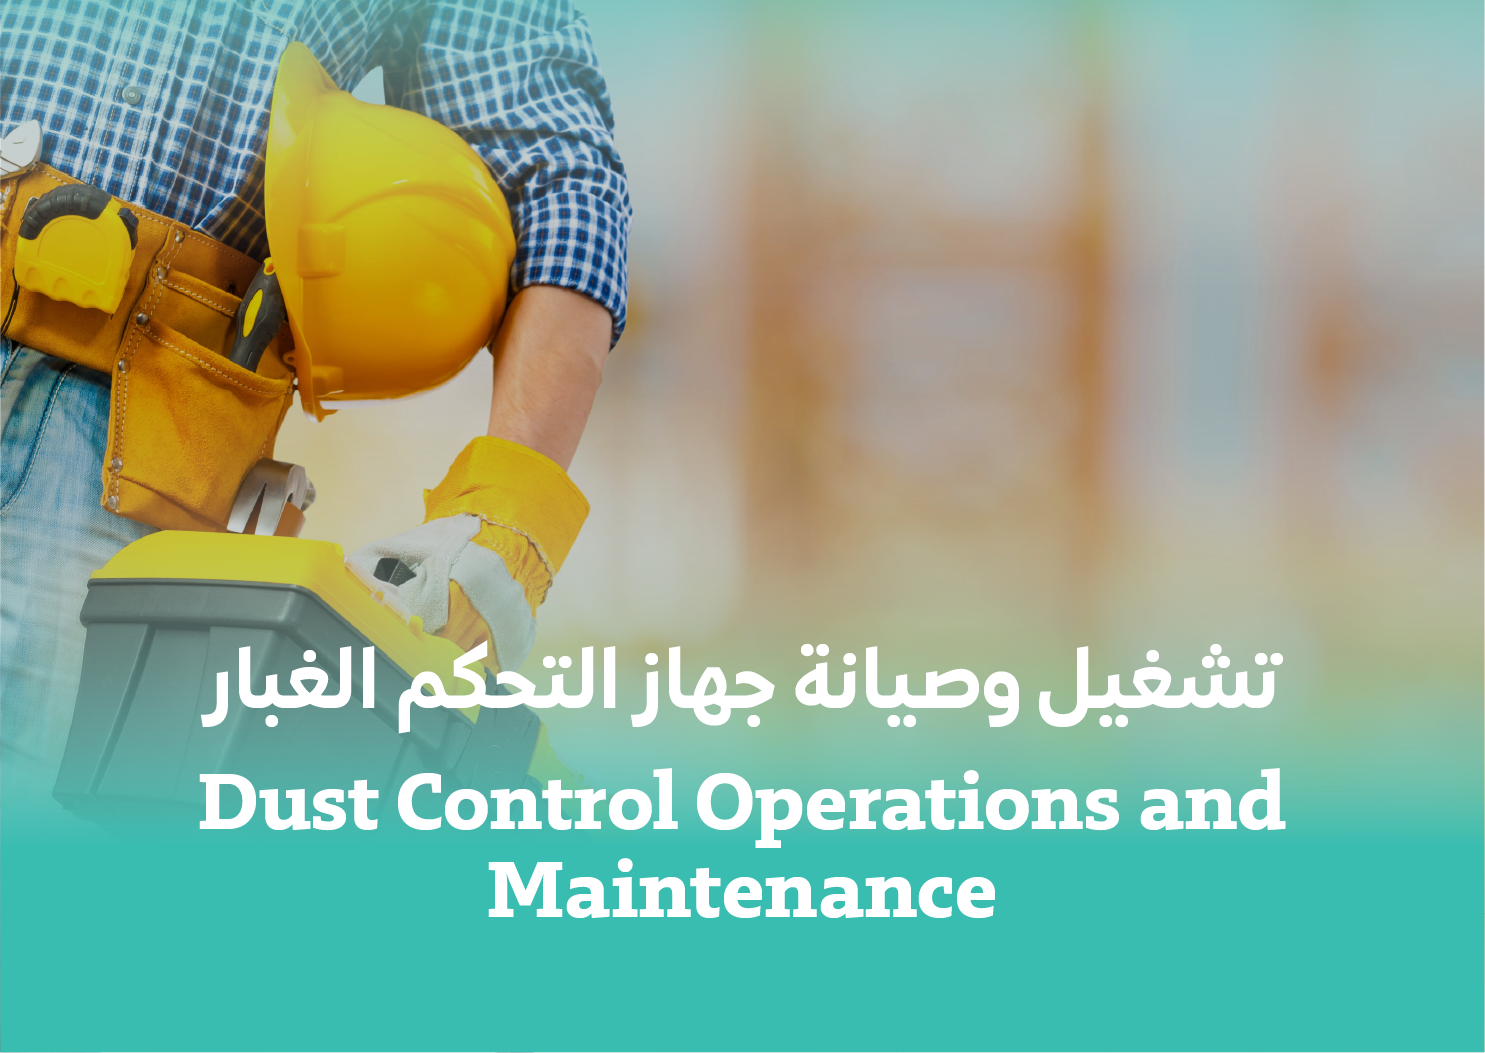 Dust Control Operations and Maintenance 